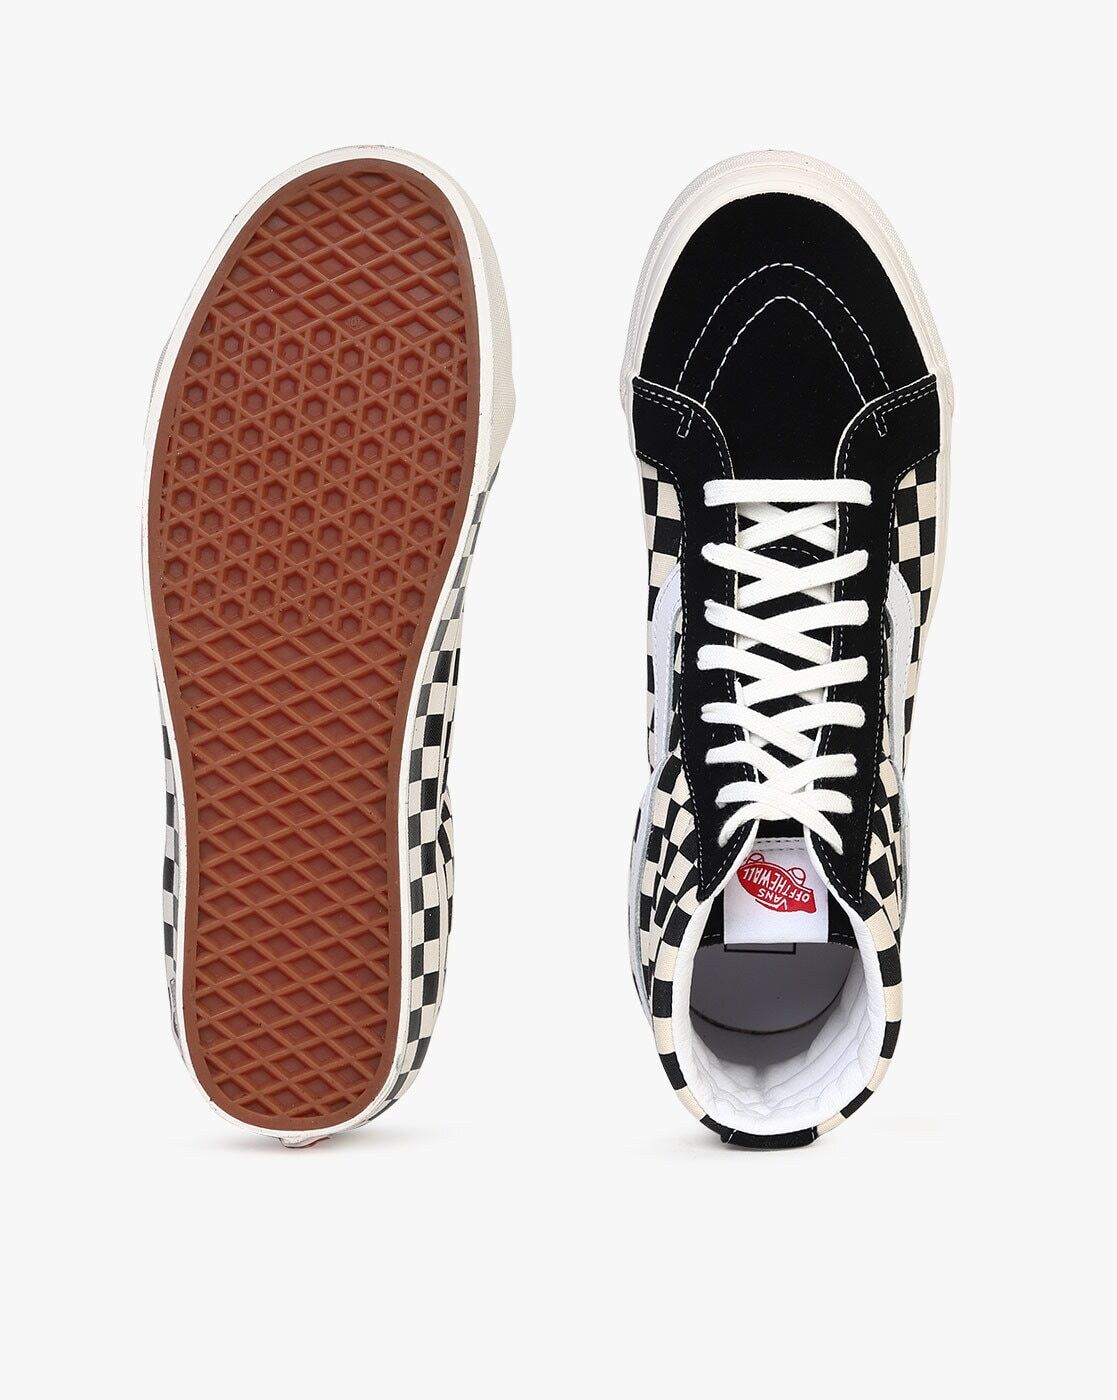 SK8-Hi 38 DX Checked Lace-Up Casual Shoes-71002741